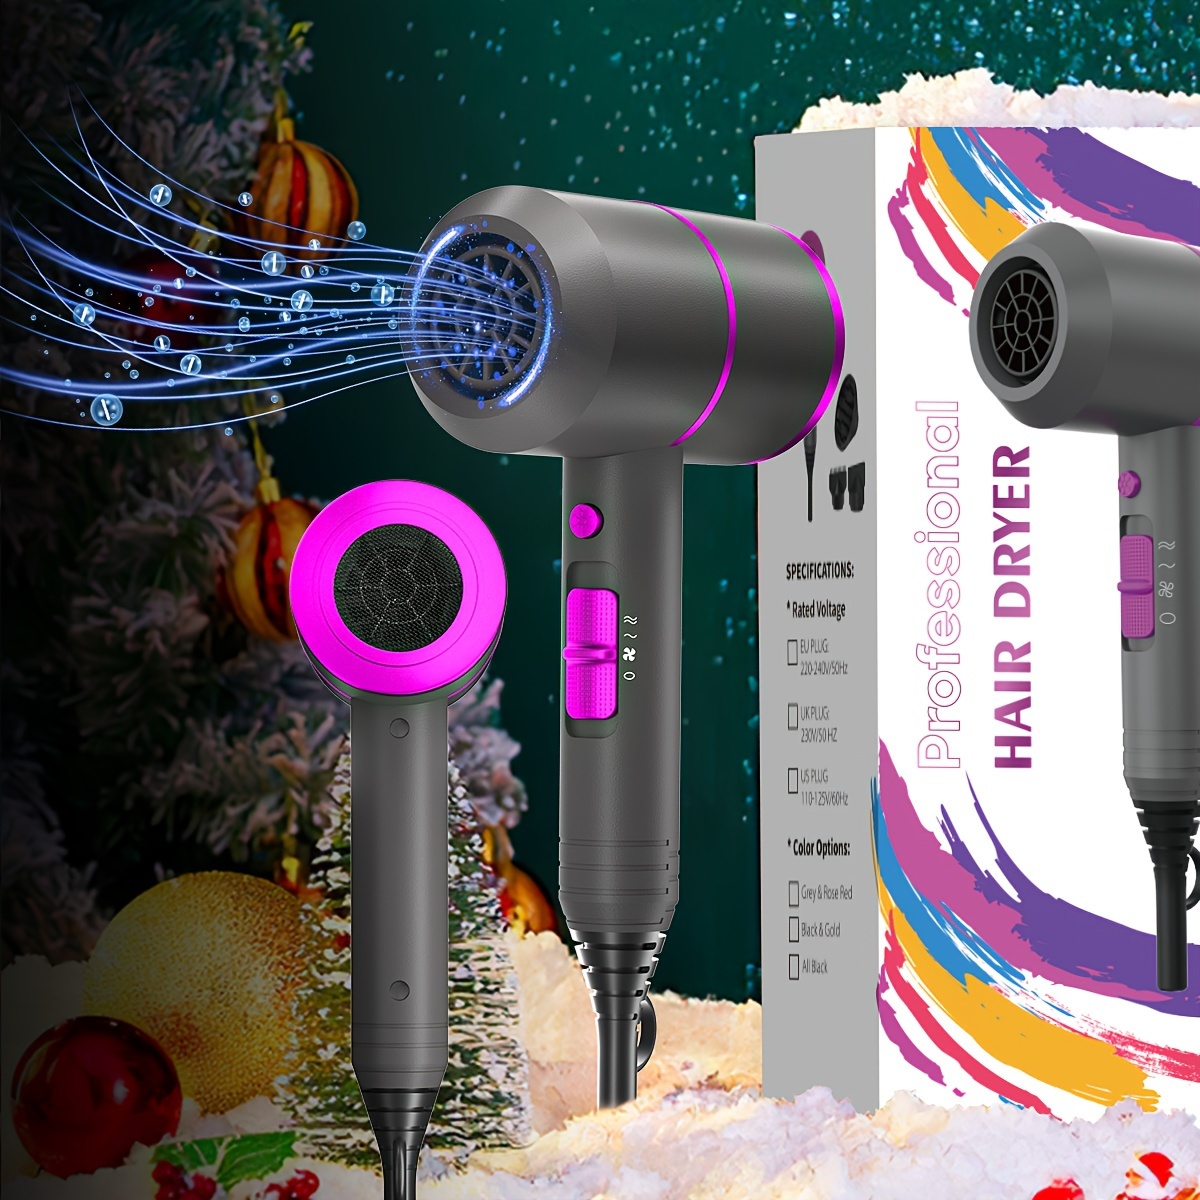 

Professional Hair Dryer, 2000w Electric Hair Dryer, Negative Ionic Hair Care Dryer For Home Use, Gifts For Women, Mother's Day Gift